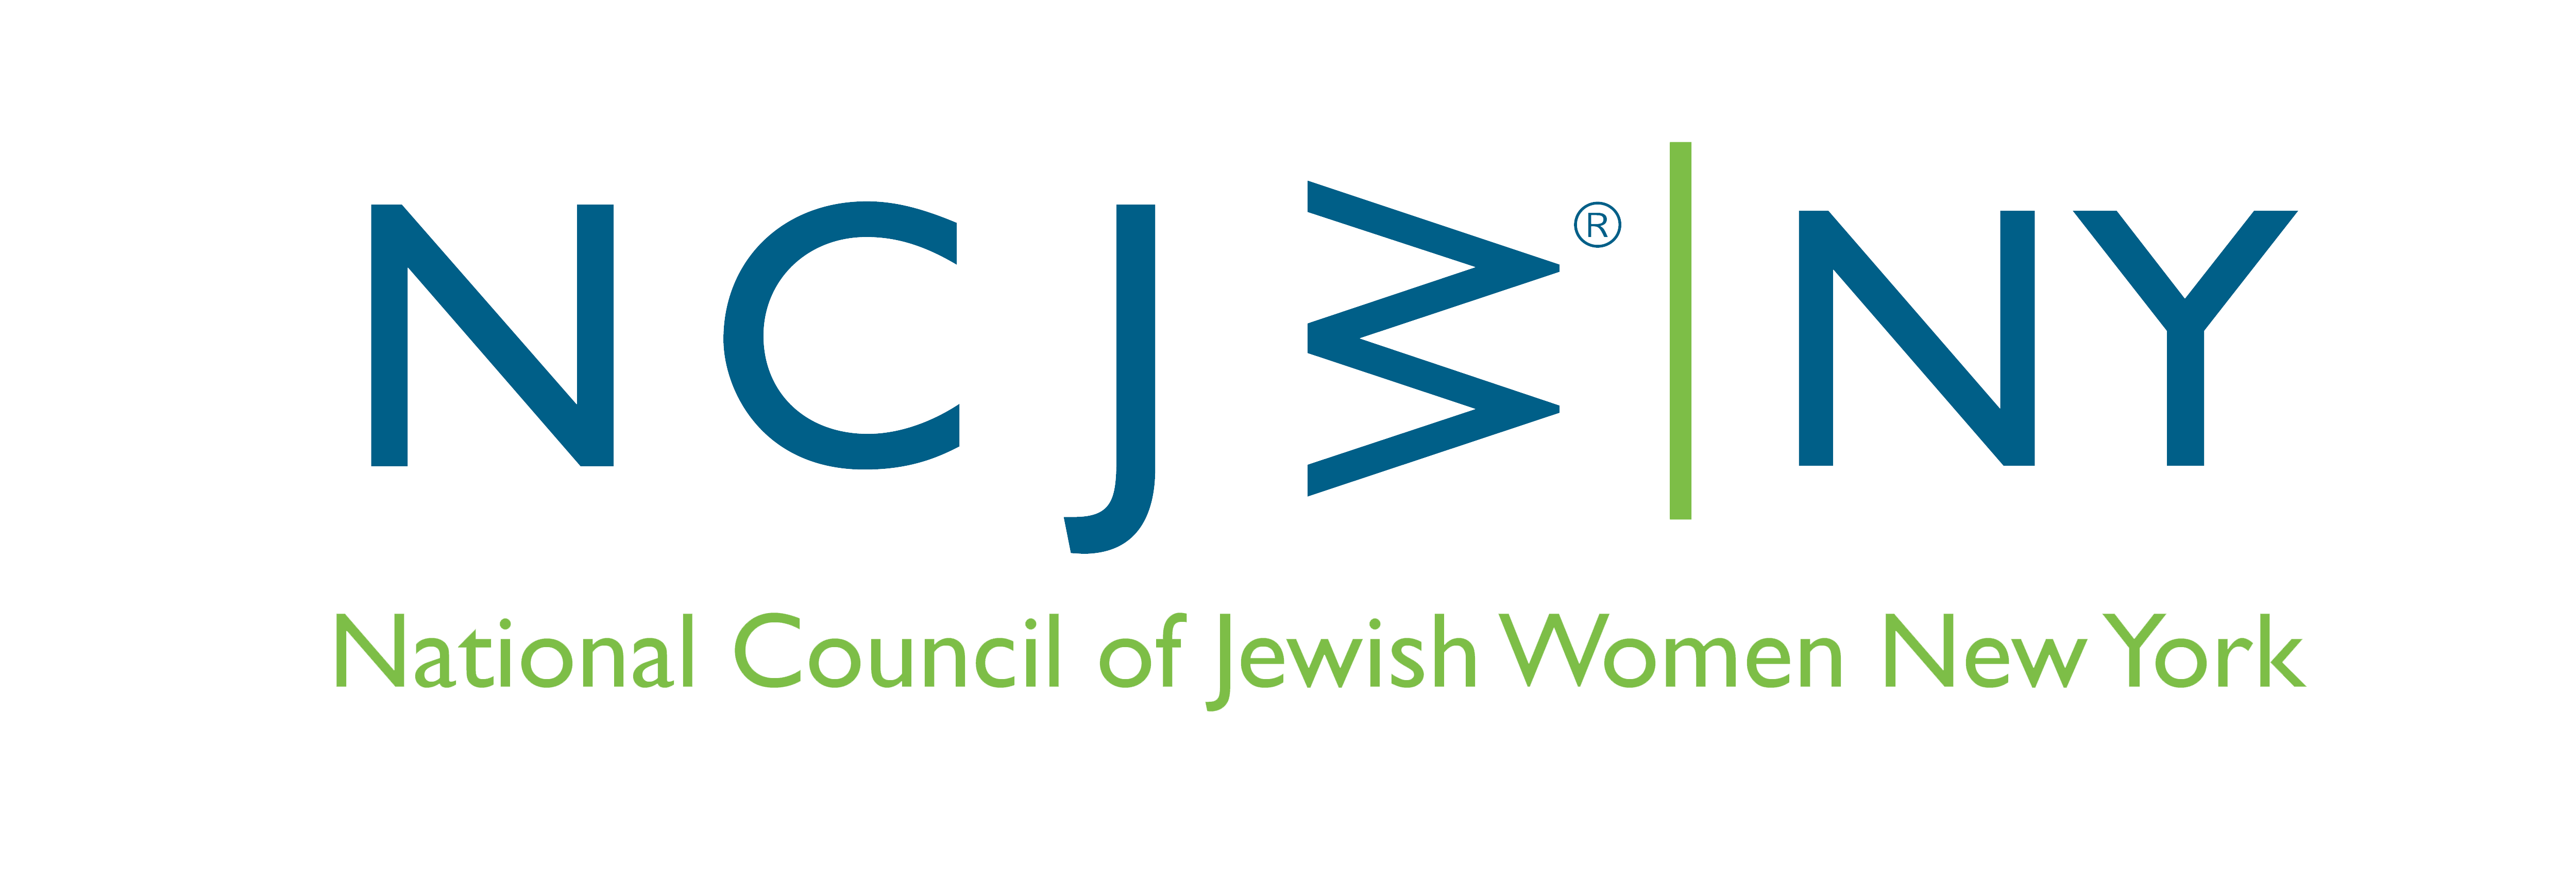 National Council of Jewish Women New York